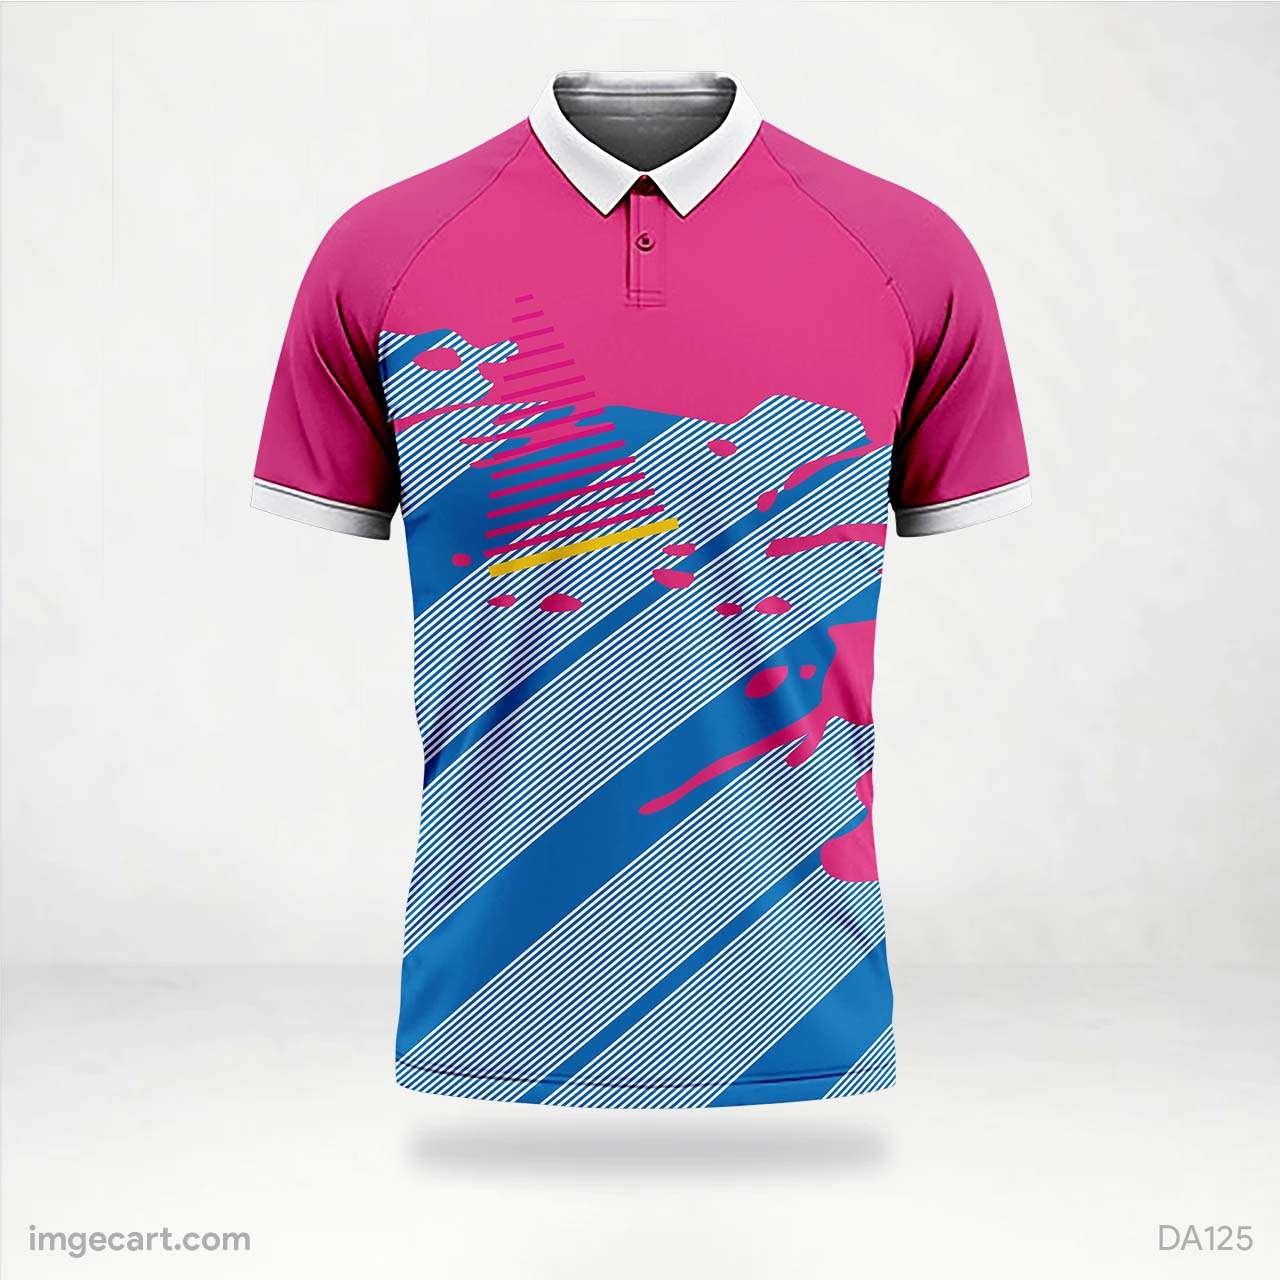 Cricket Jersey PINK WITH BLUE LINES EFFECT - imgecart